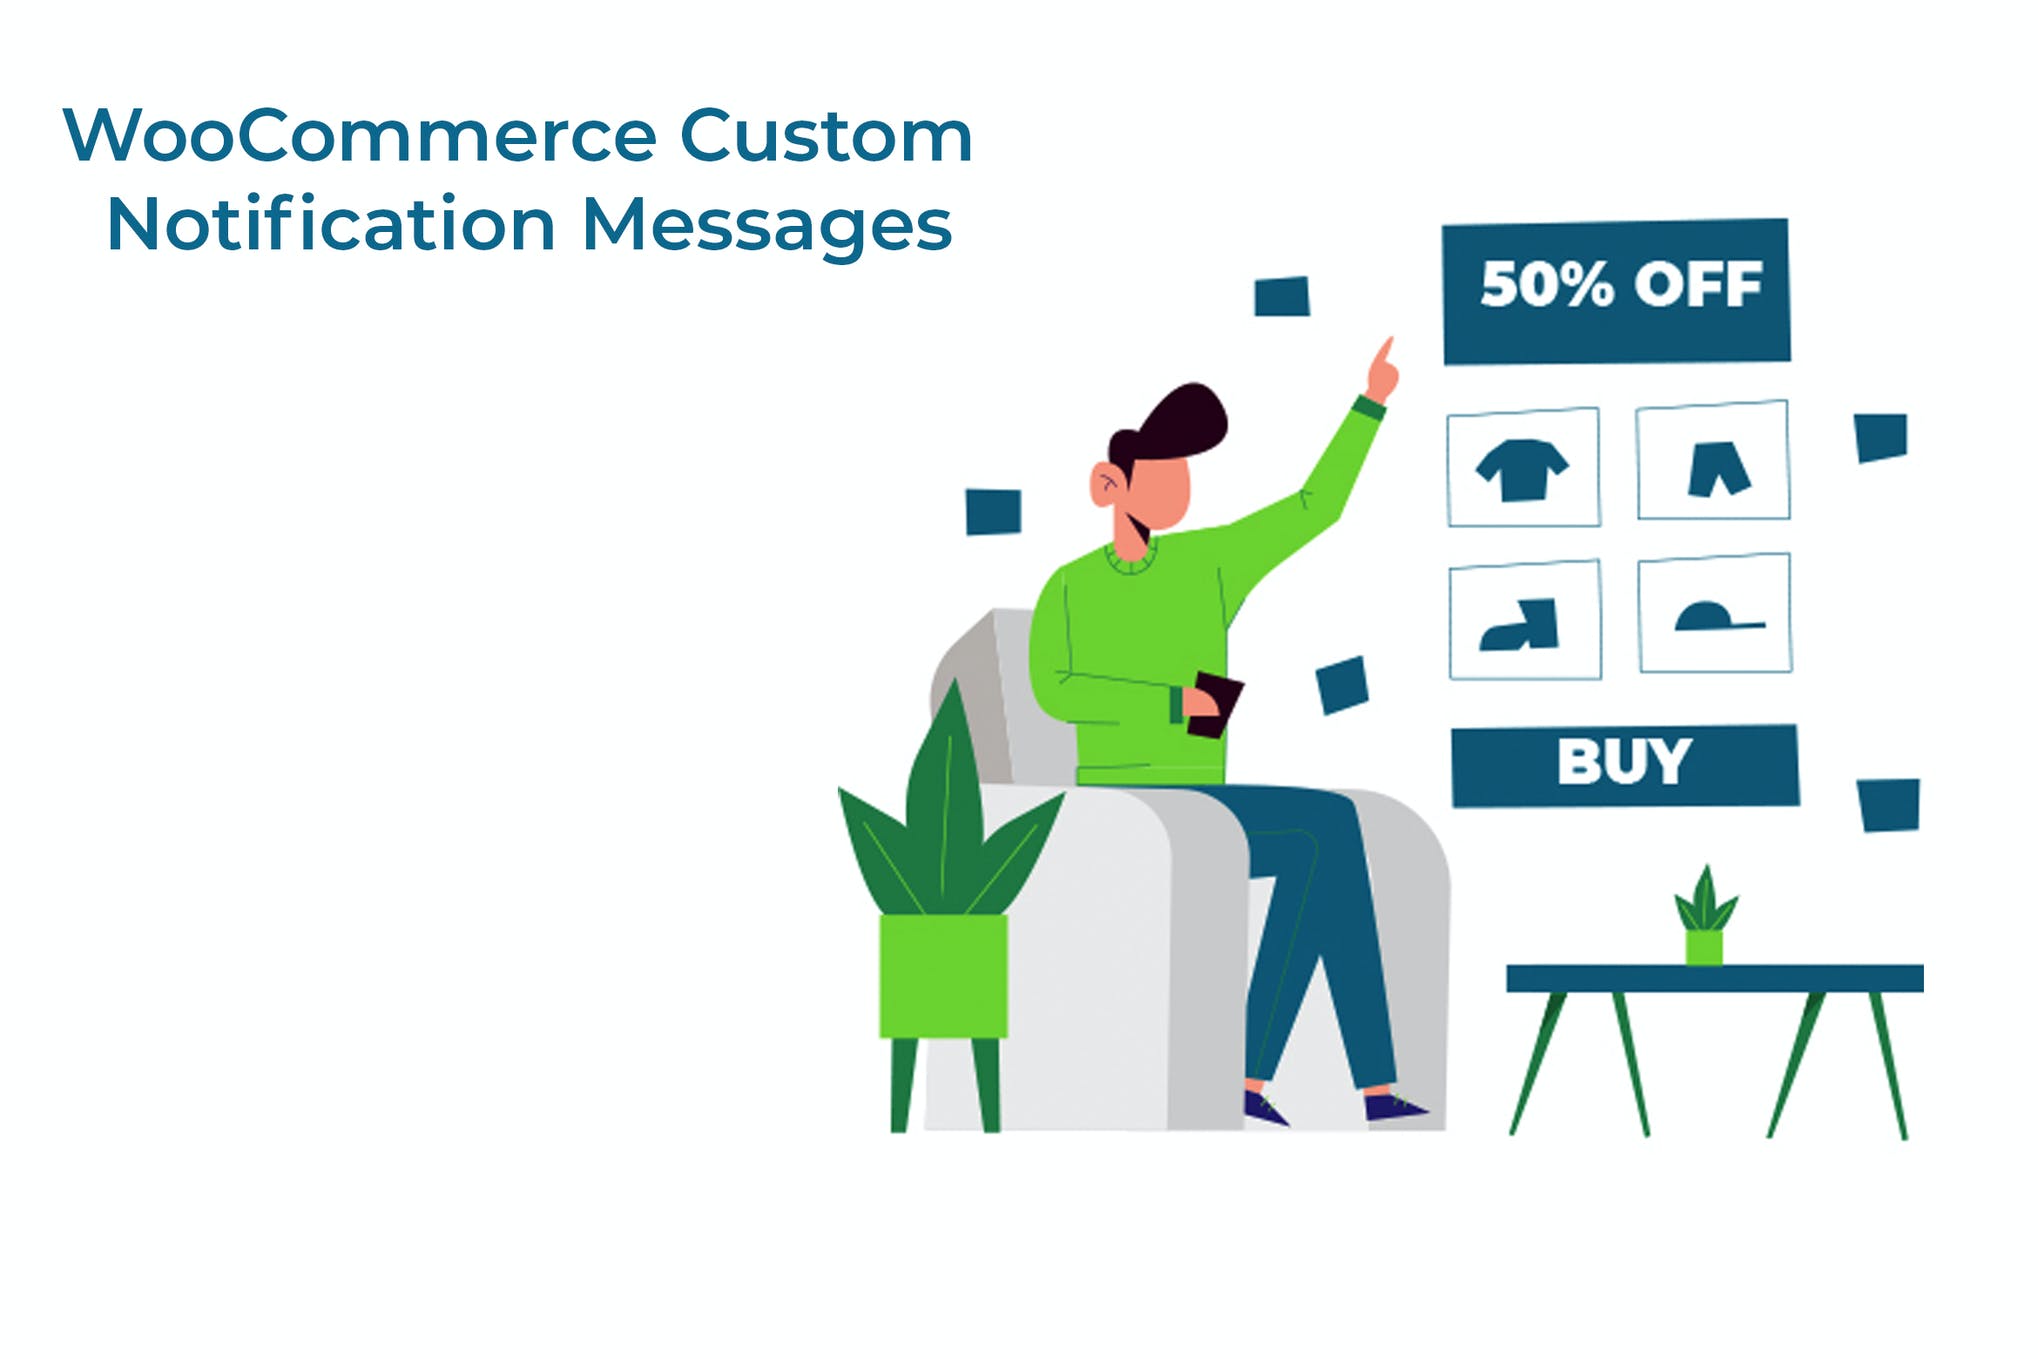 WooCommerce Custom Notification Messages for Shop / Products / Cart / Checkout Pages